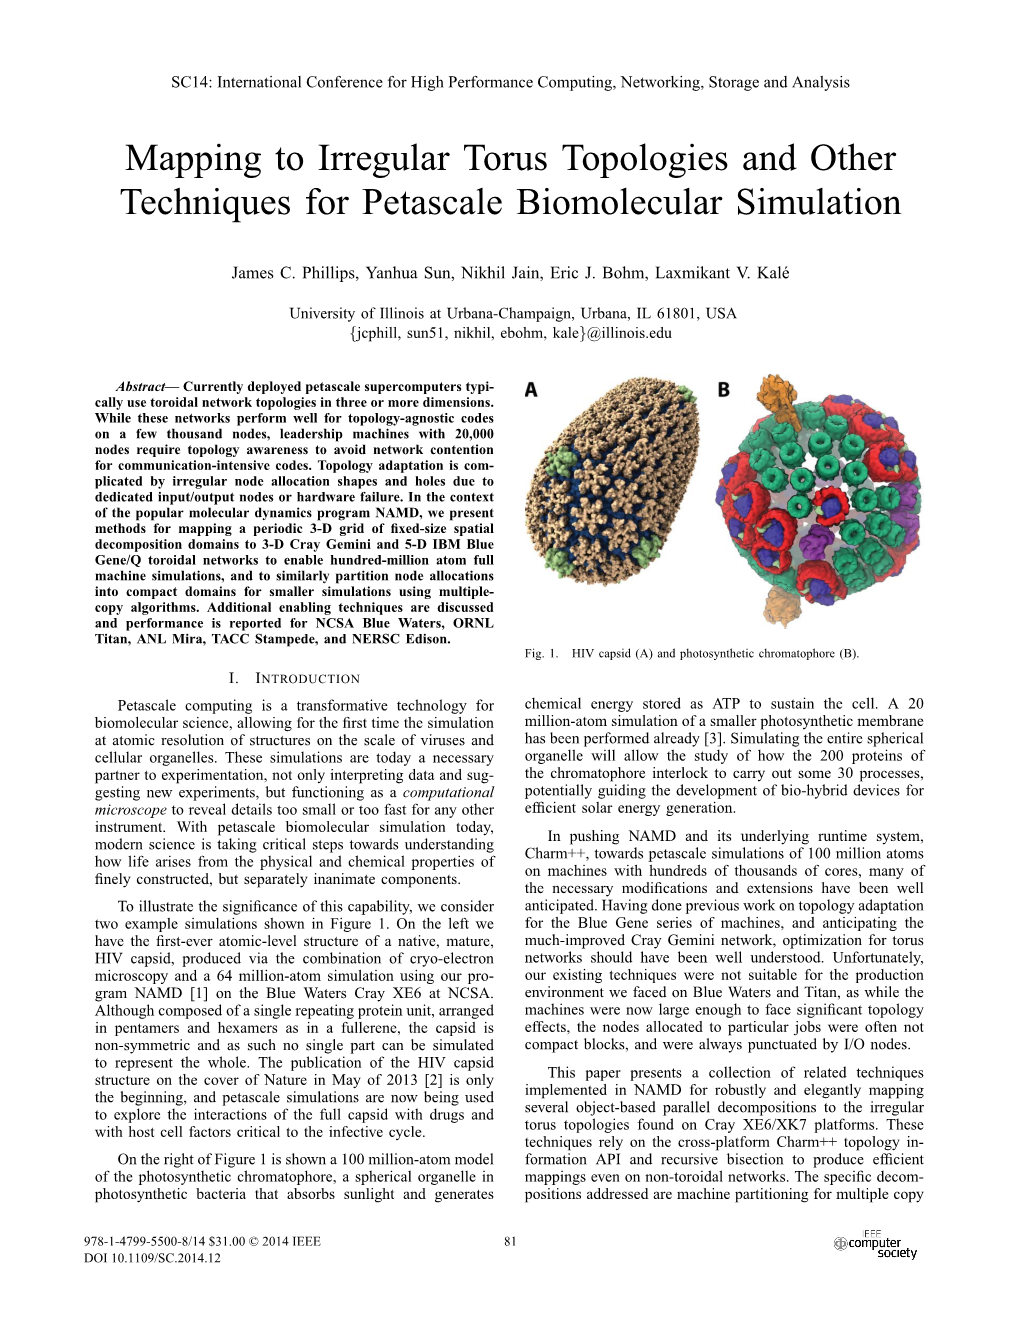 Mapping to Irregular Torus Topologies and Other Techniques for Petascale Biomolecular Simulation